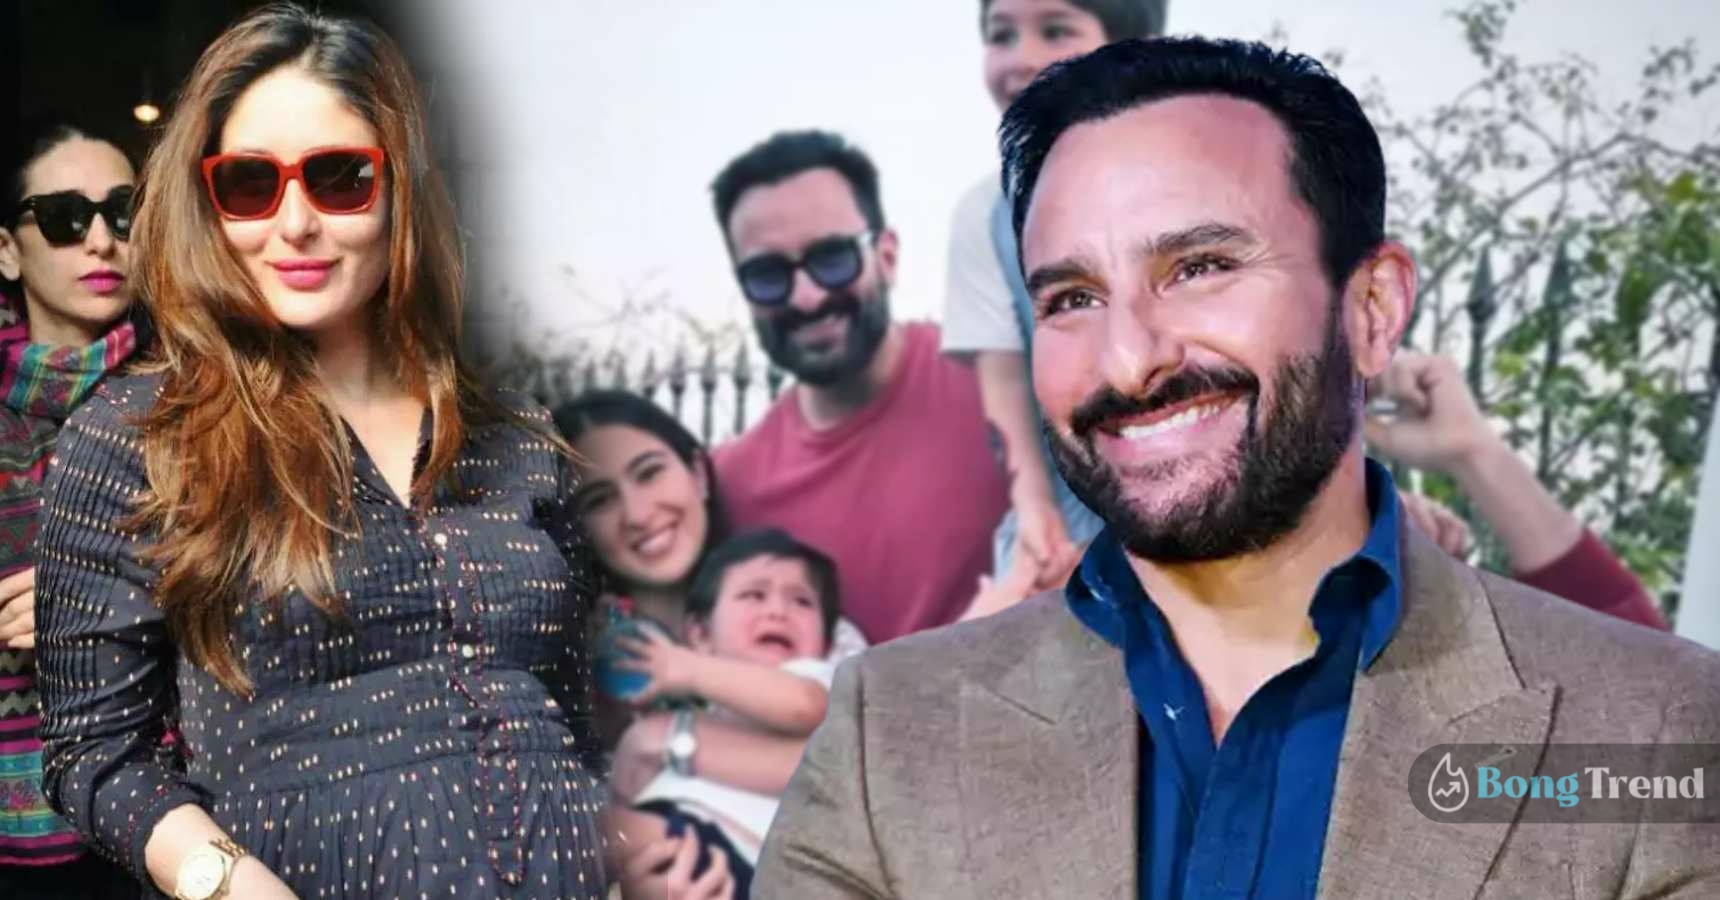 Saif Ali Khan becaming 5 time father Kareen Kapoor pregnency rumour with viral baby bump photo